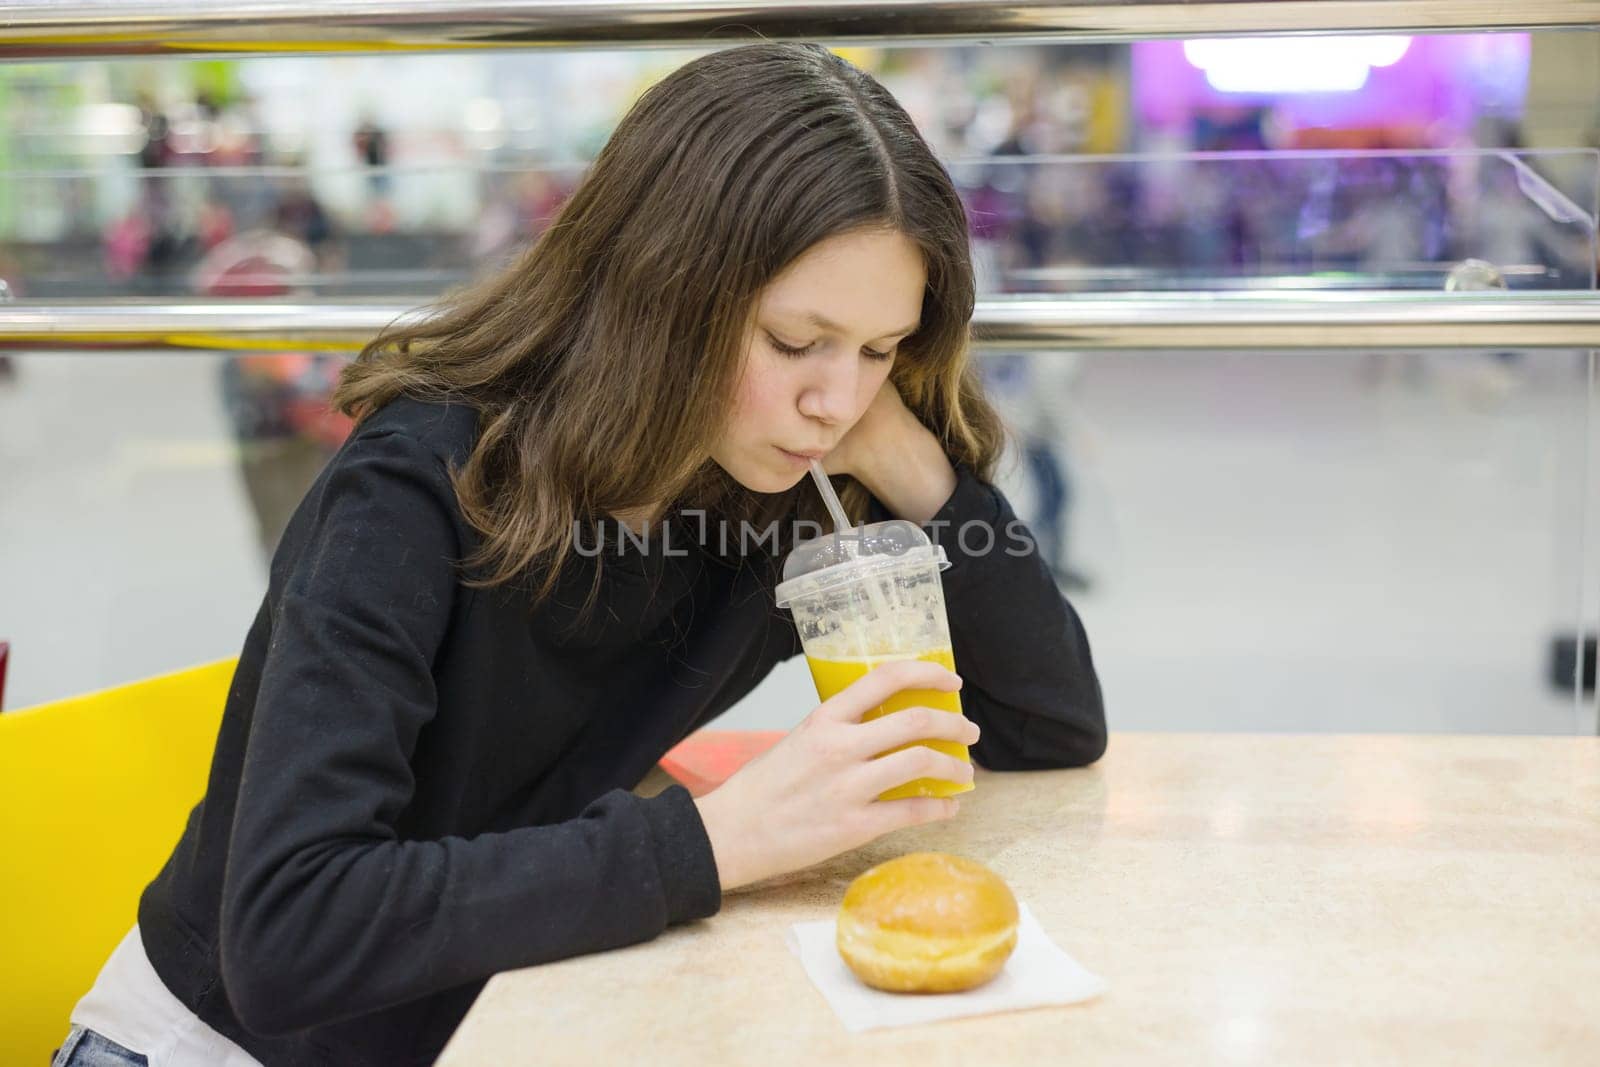 Teenage girl sitting at a table eating cake and drinking juice, break on food.